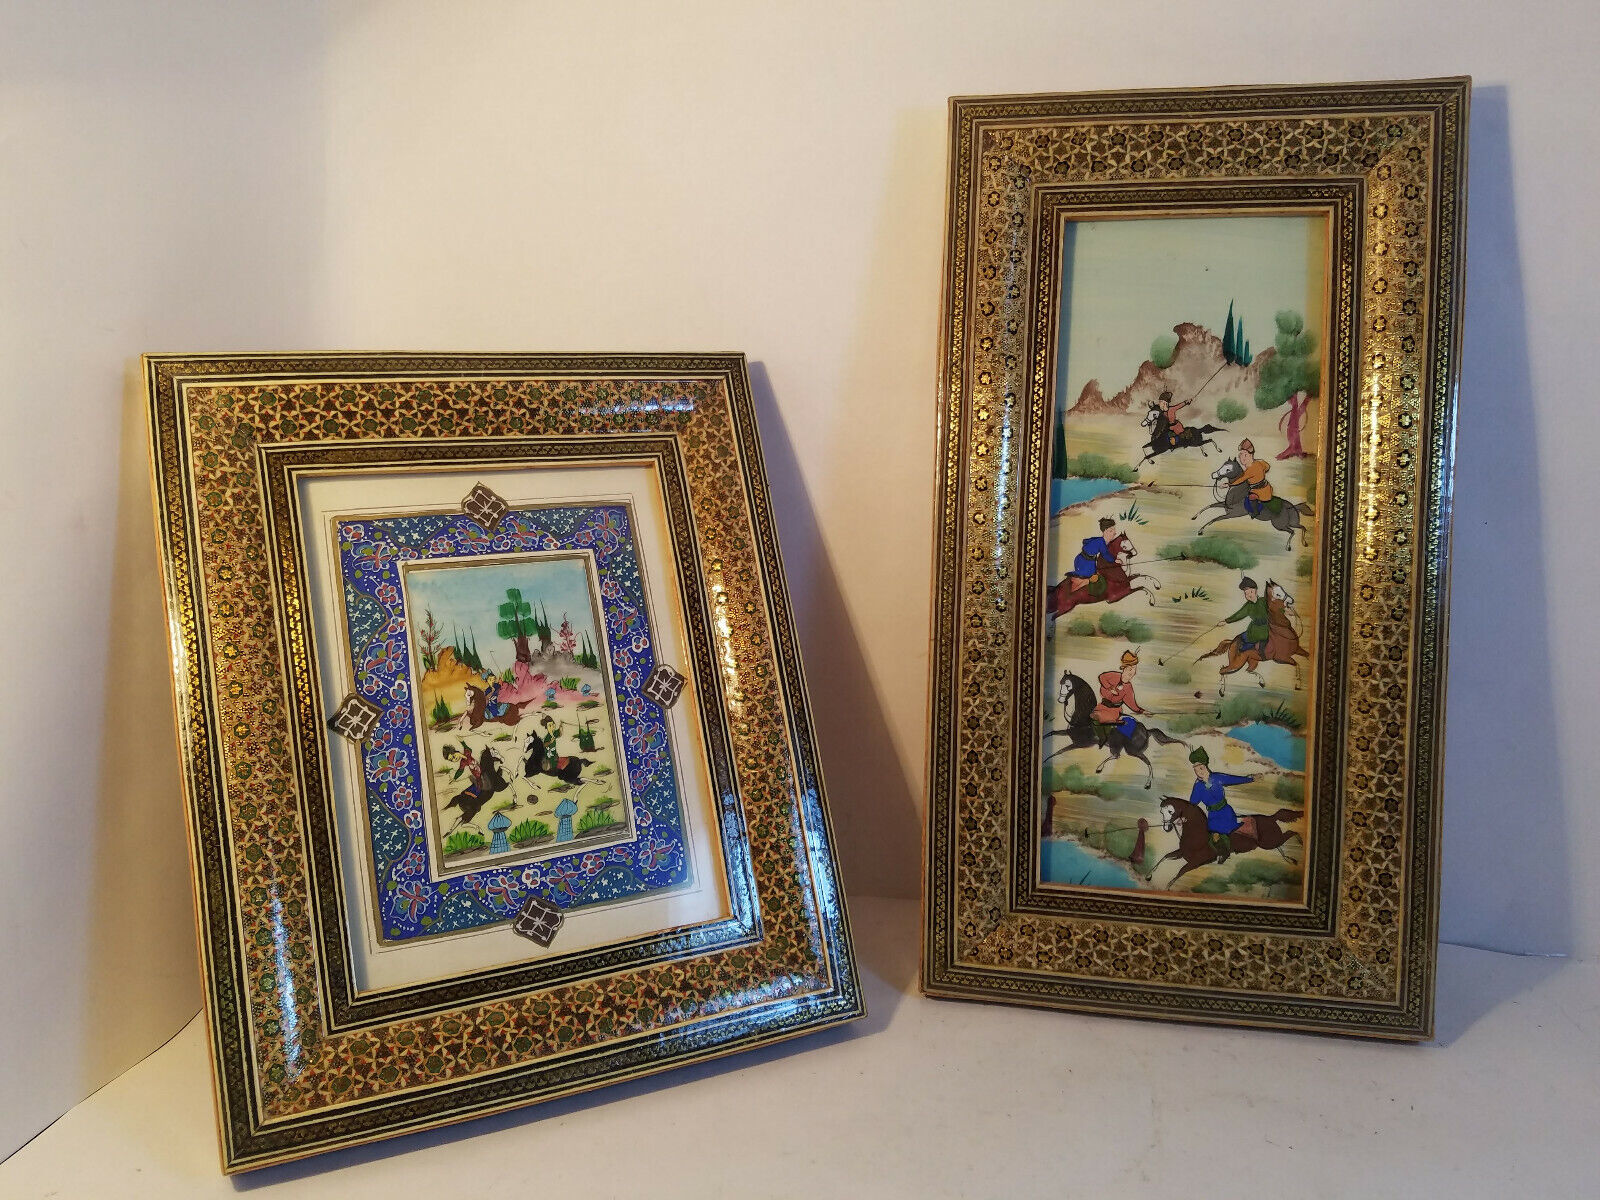 Lot of 2 Vintage Persian Equestrian Paintings in Wooden Khatam Inlay Frames Без бренда